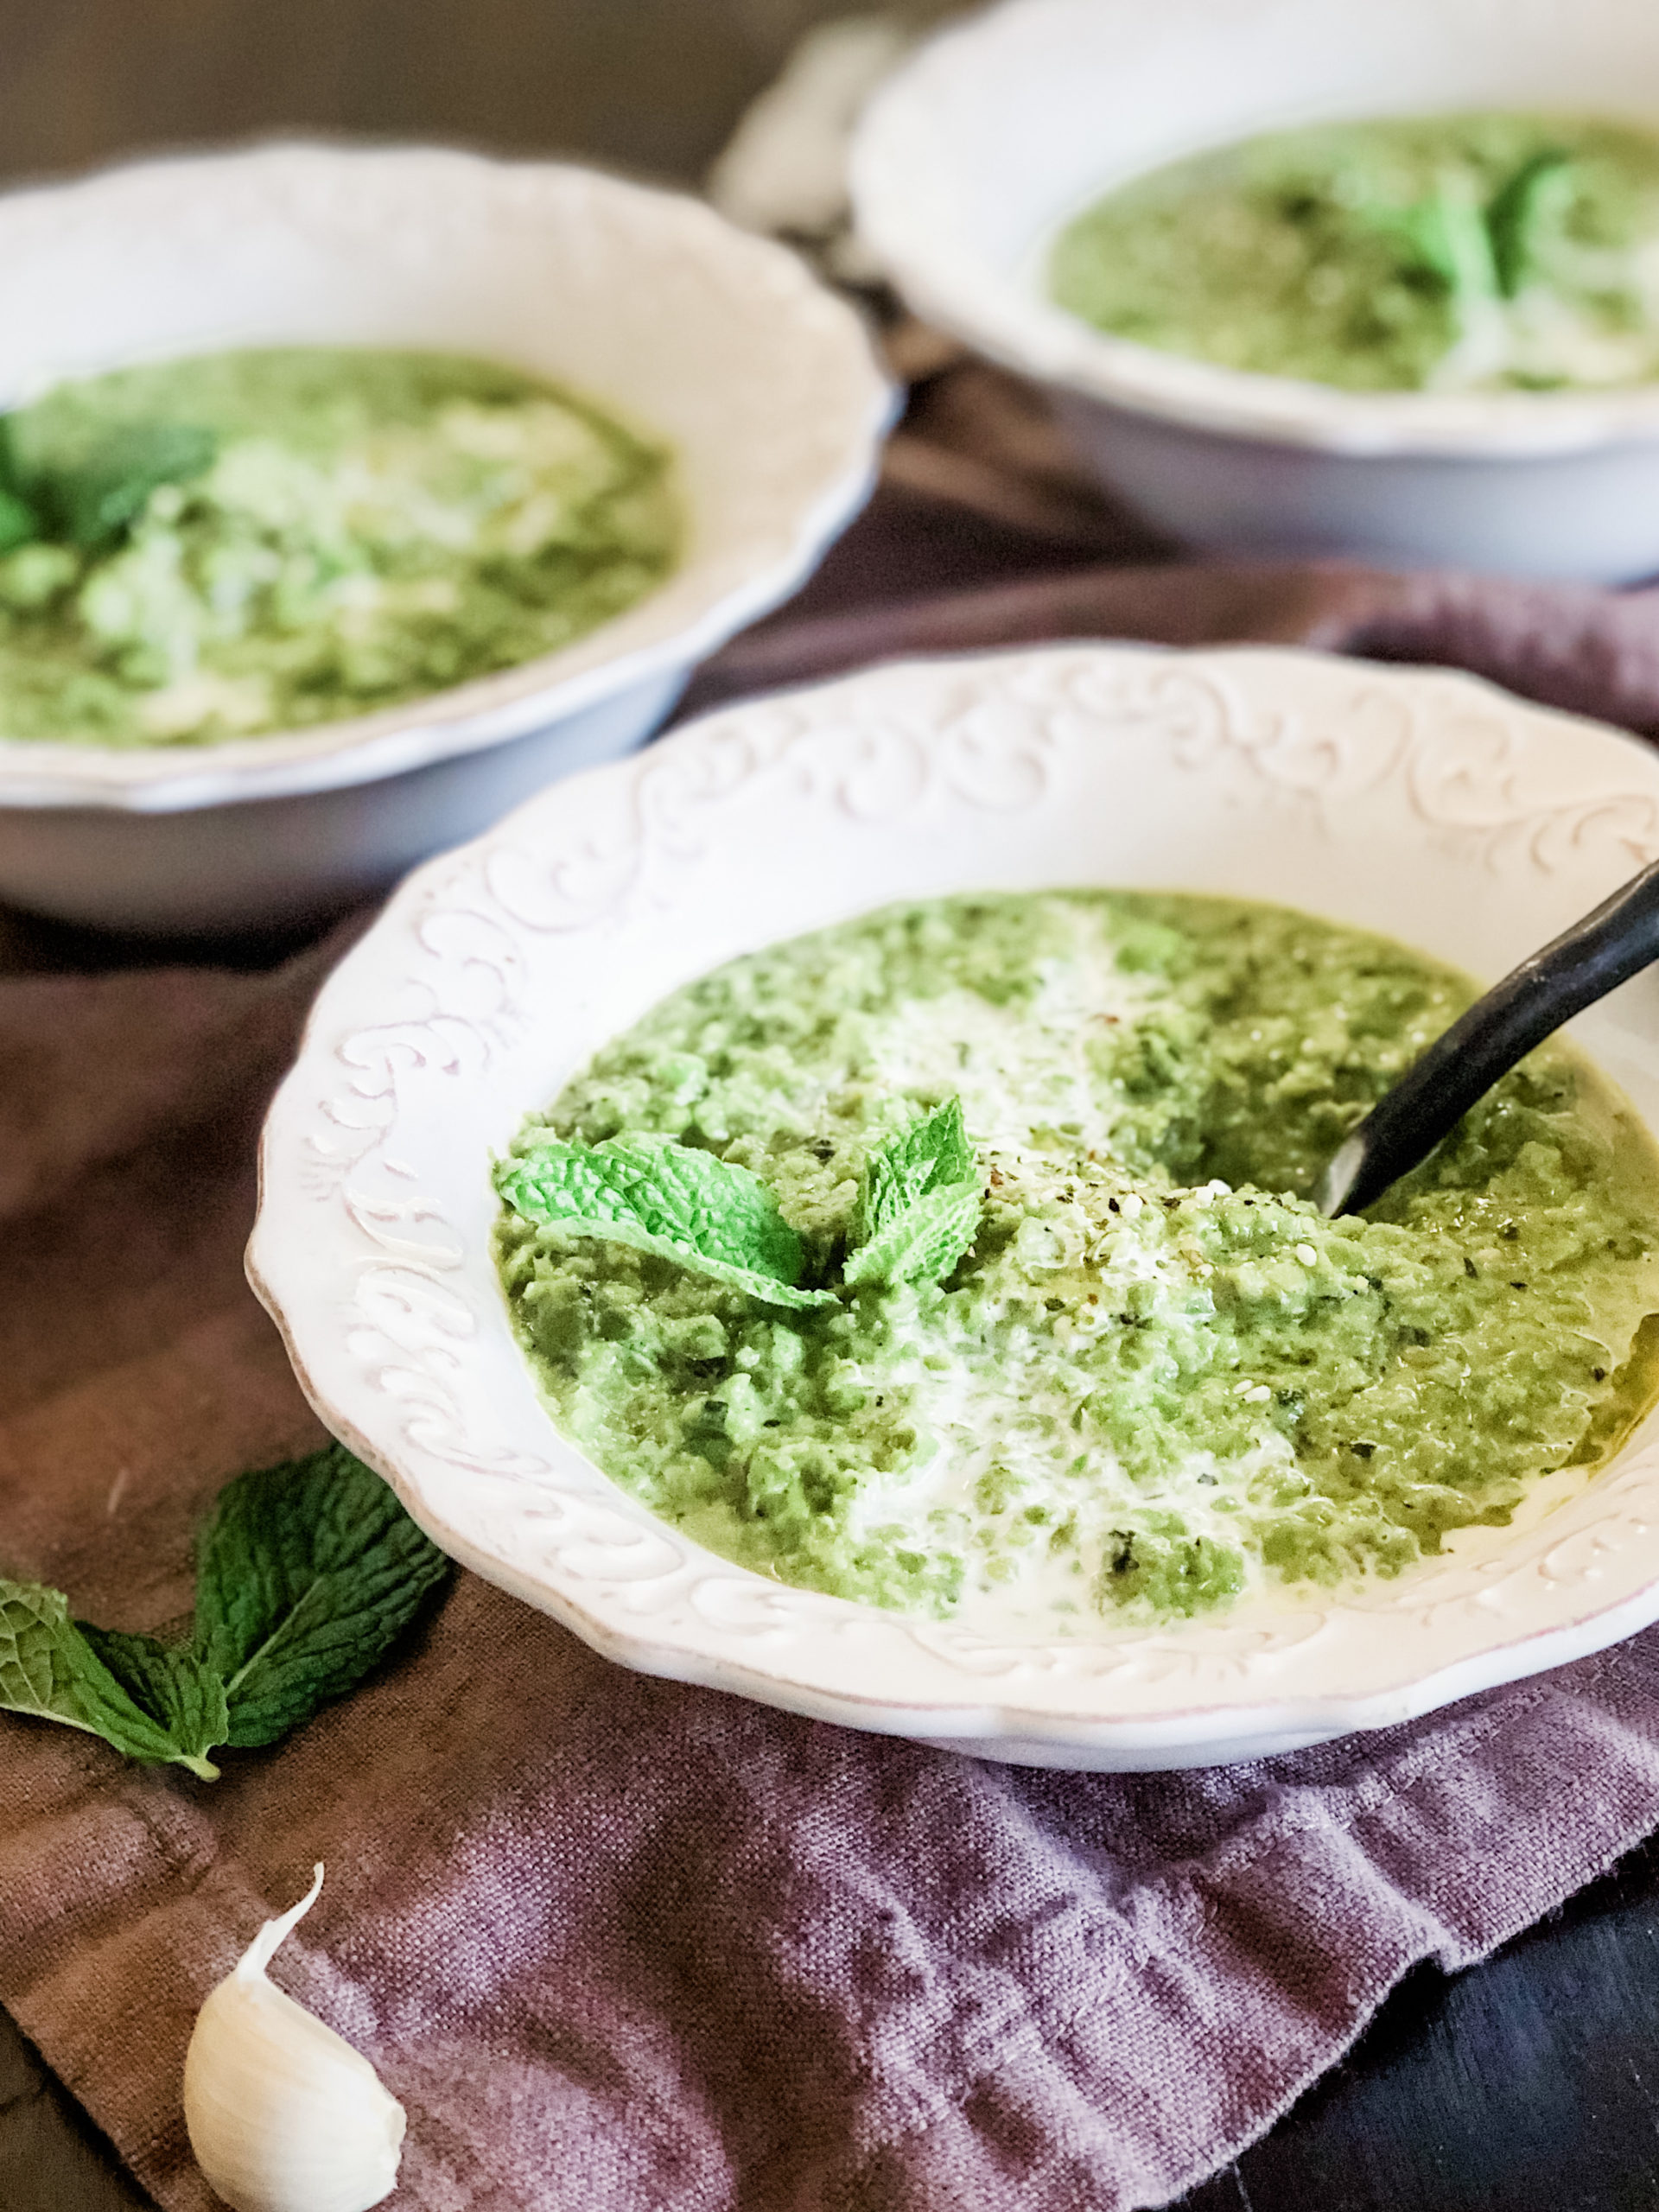 Spring Pea Soup from Seasonally Jane -- at-home cooking inspired by the seasons. This fresh Spring Pea Soup is a clean recipe with minimal ingredients. The secret ingredients to round out the pea flavor are asparagus and mint.